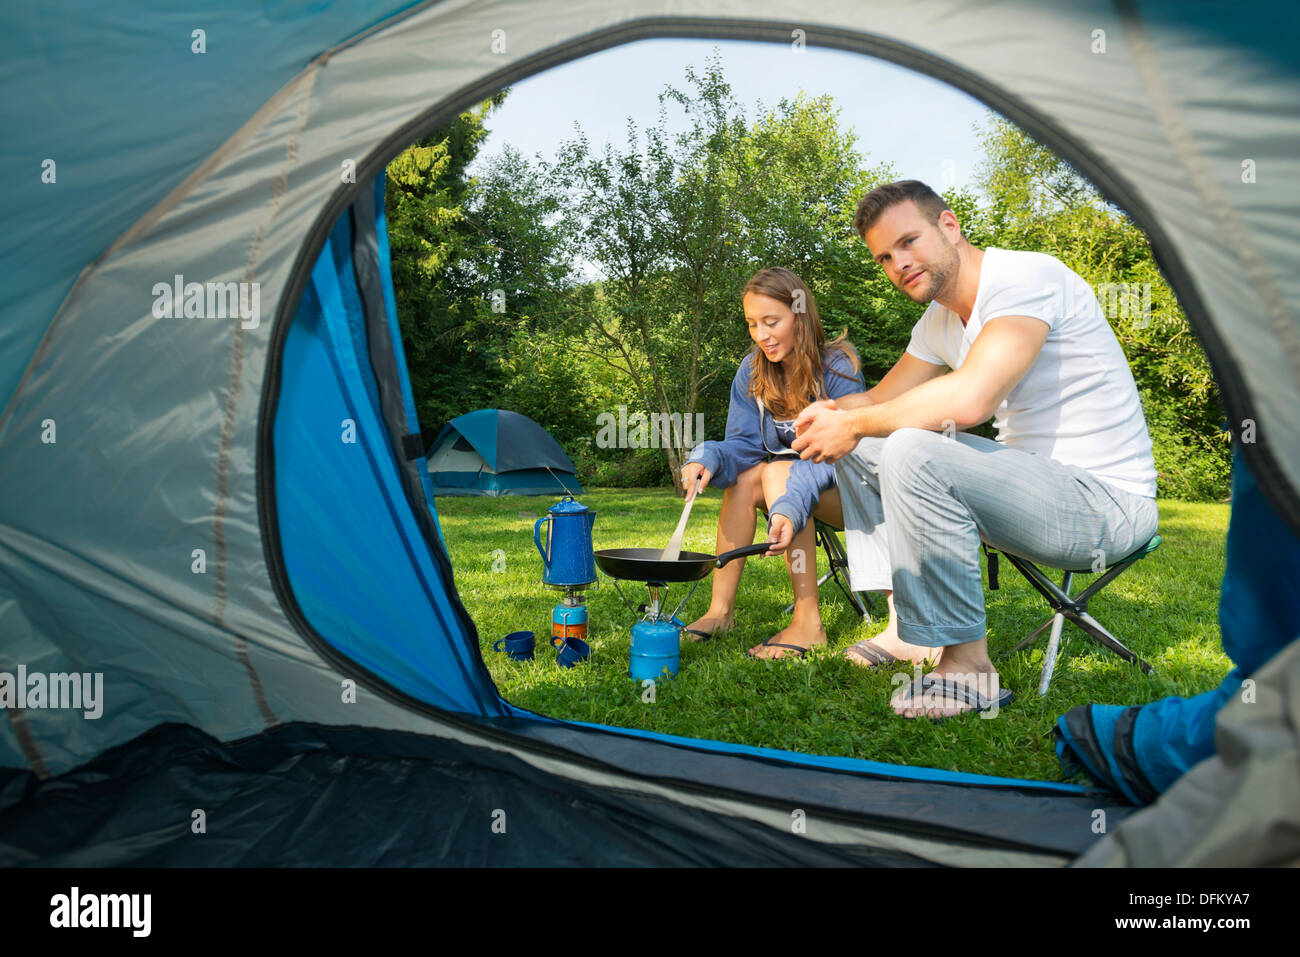 A young couple cooking in front of a tent Stock Photo